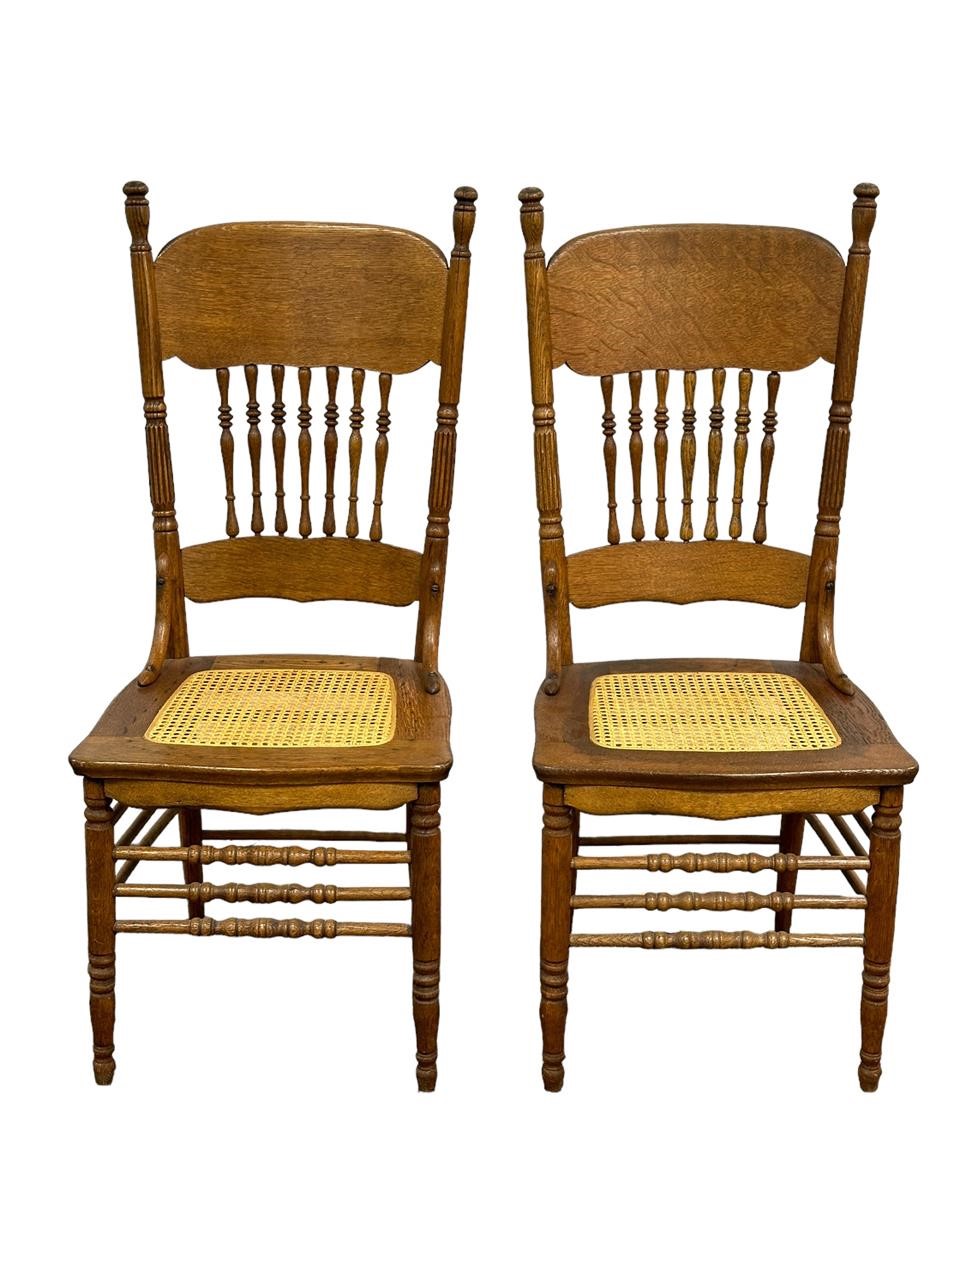 Pair of Oak Chairs w/ Cane Seats